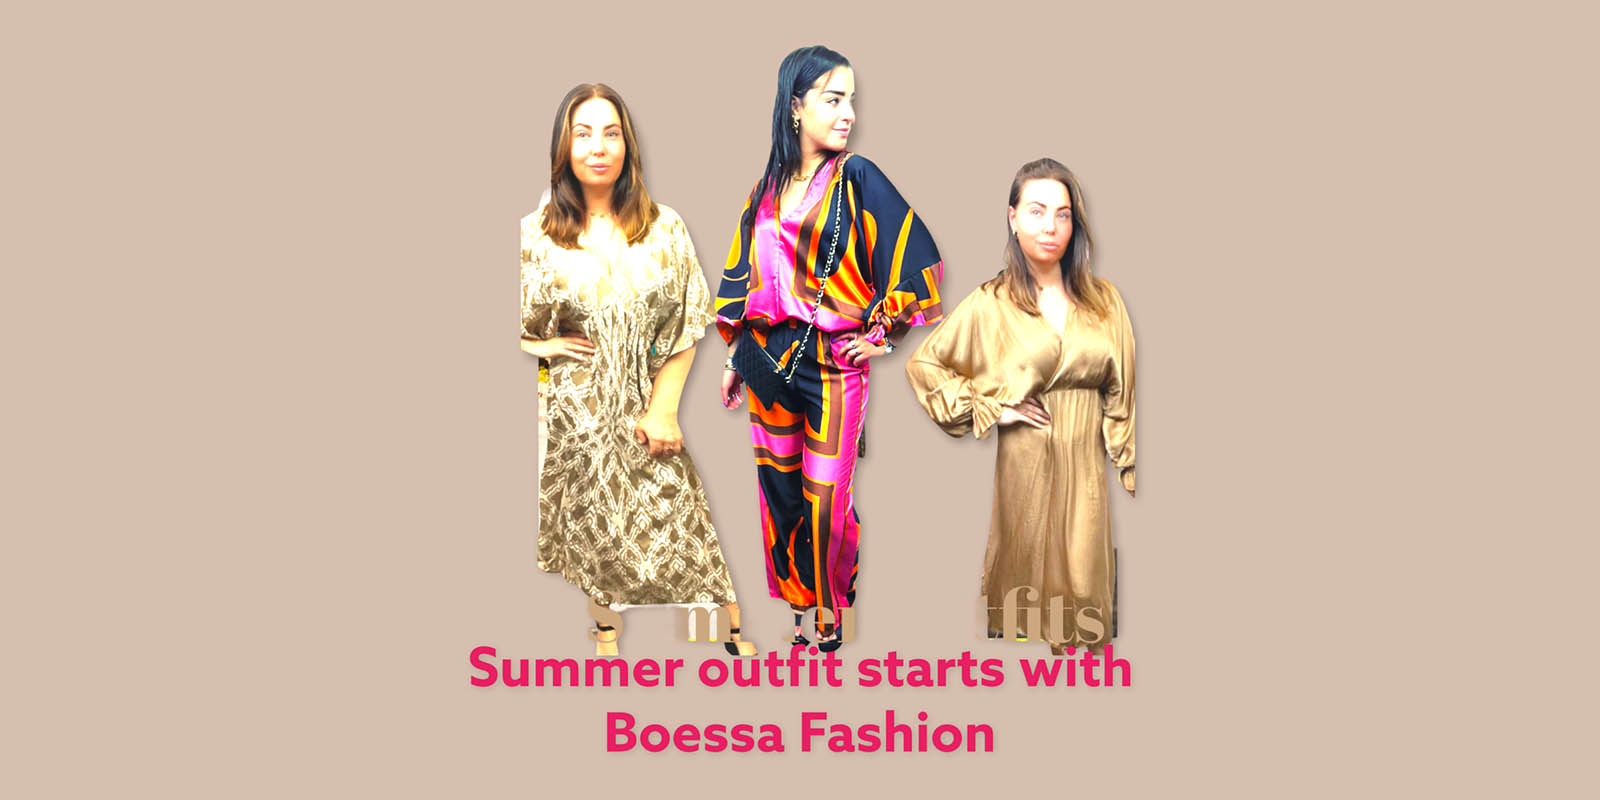 Summer outfit starts with Boessa Fashion